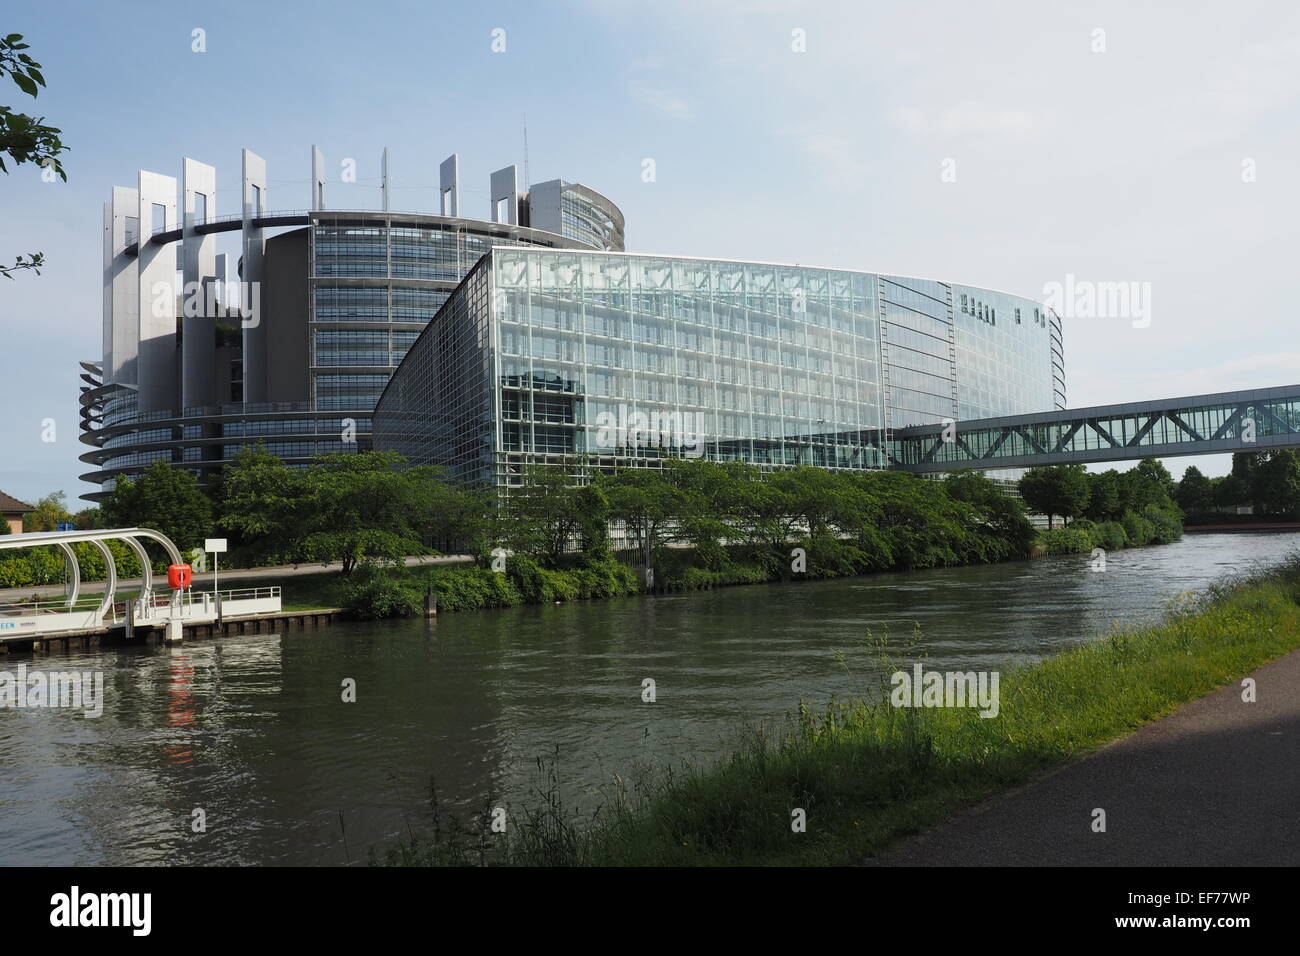 European Court Of Human Rights. Stock Photo